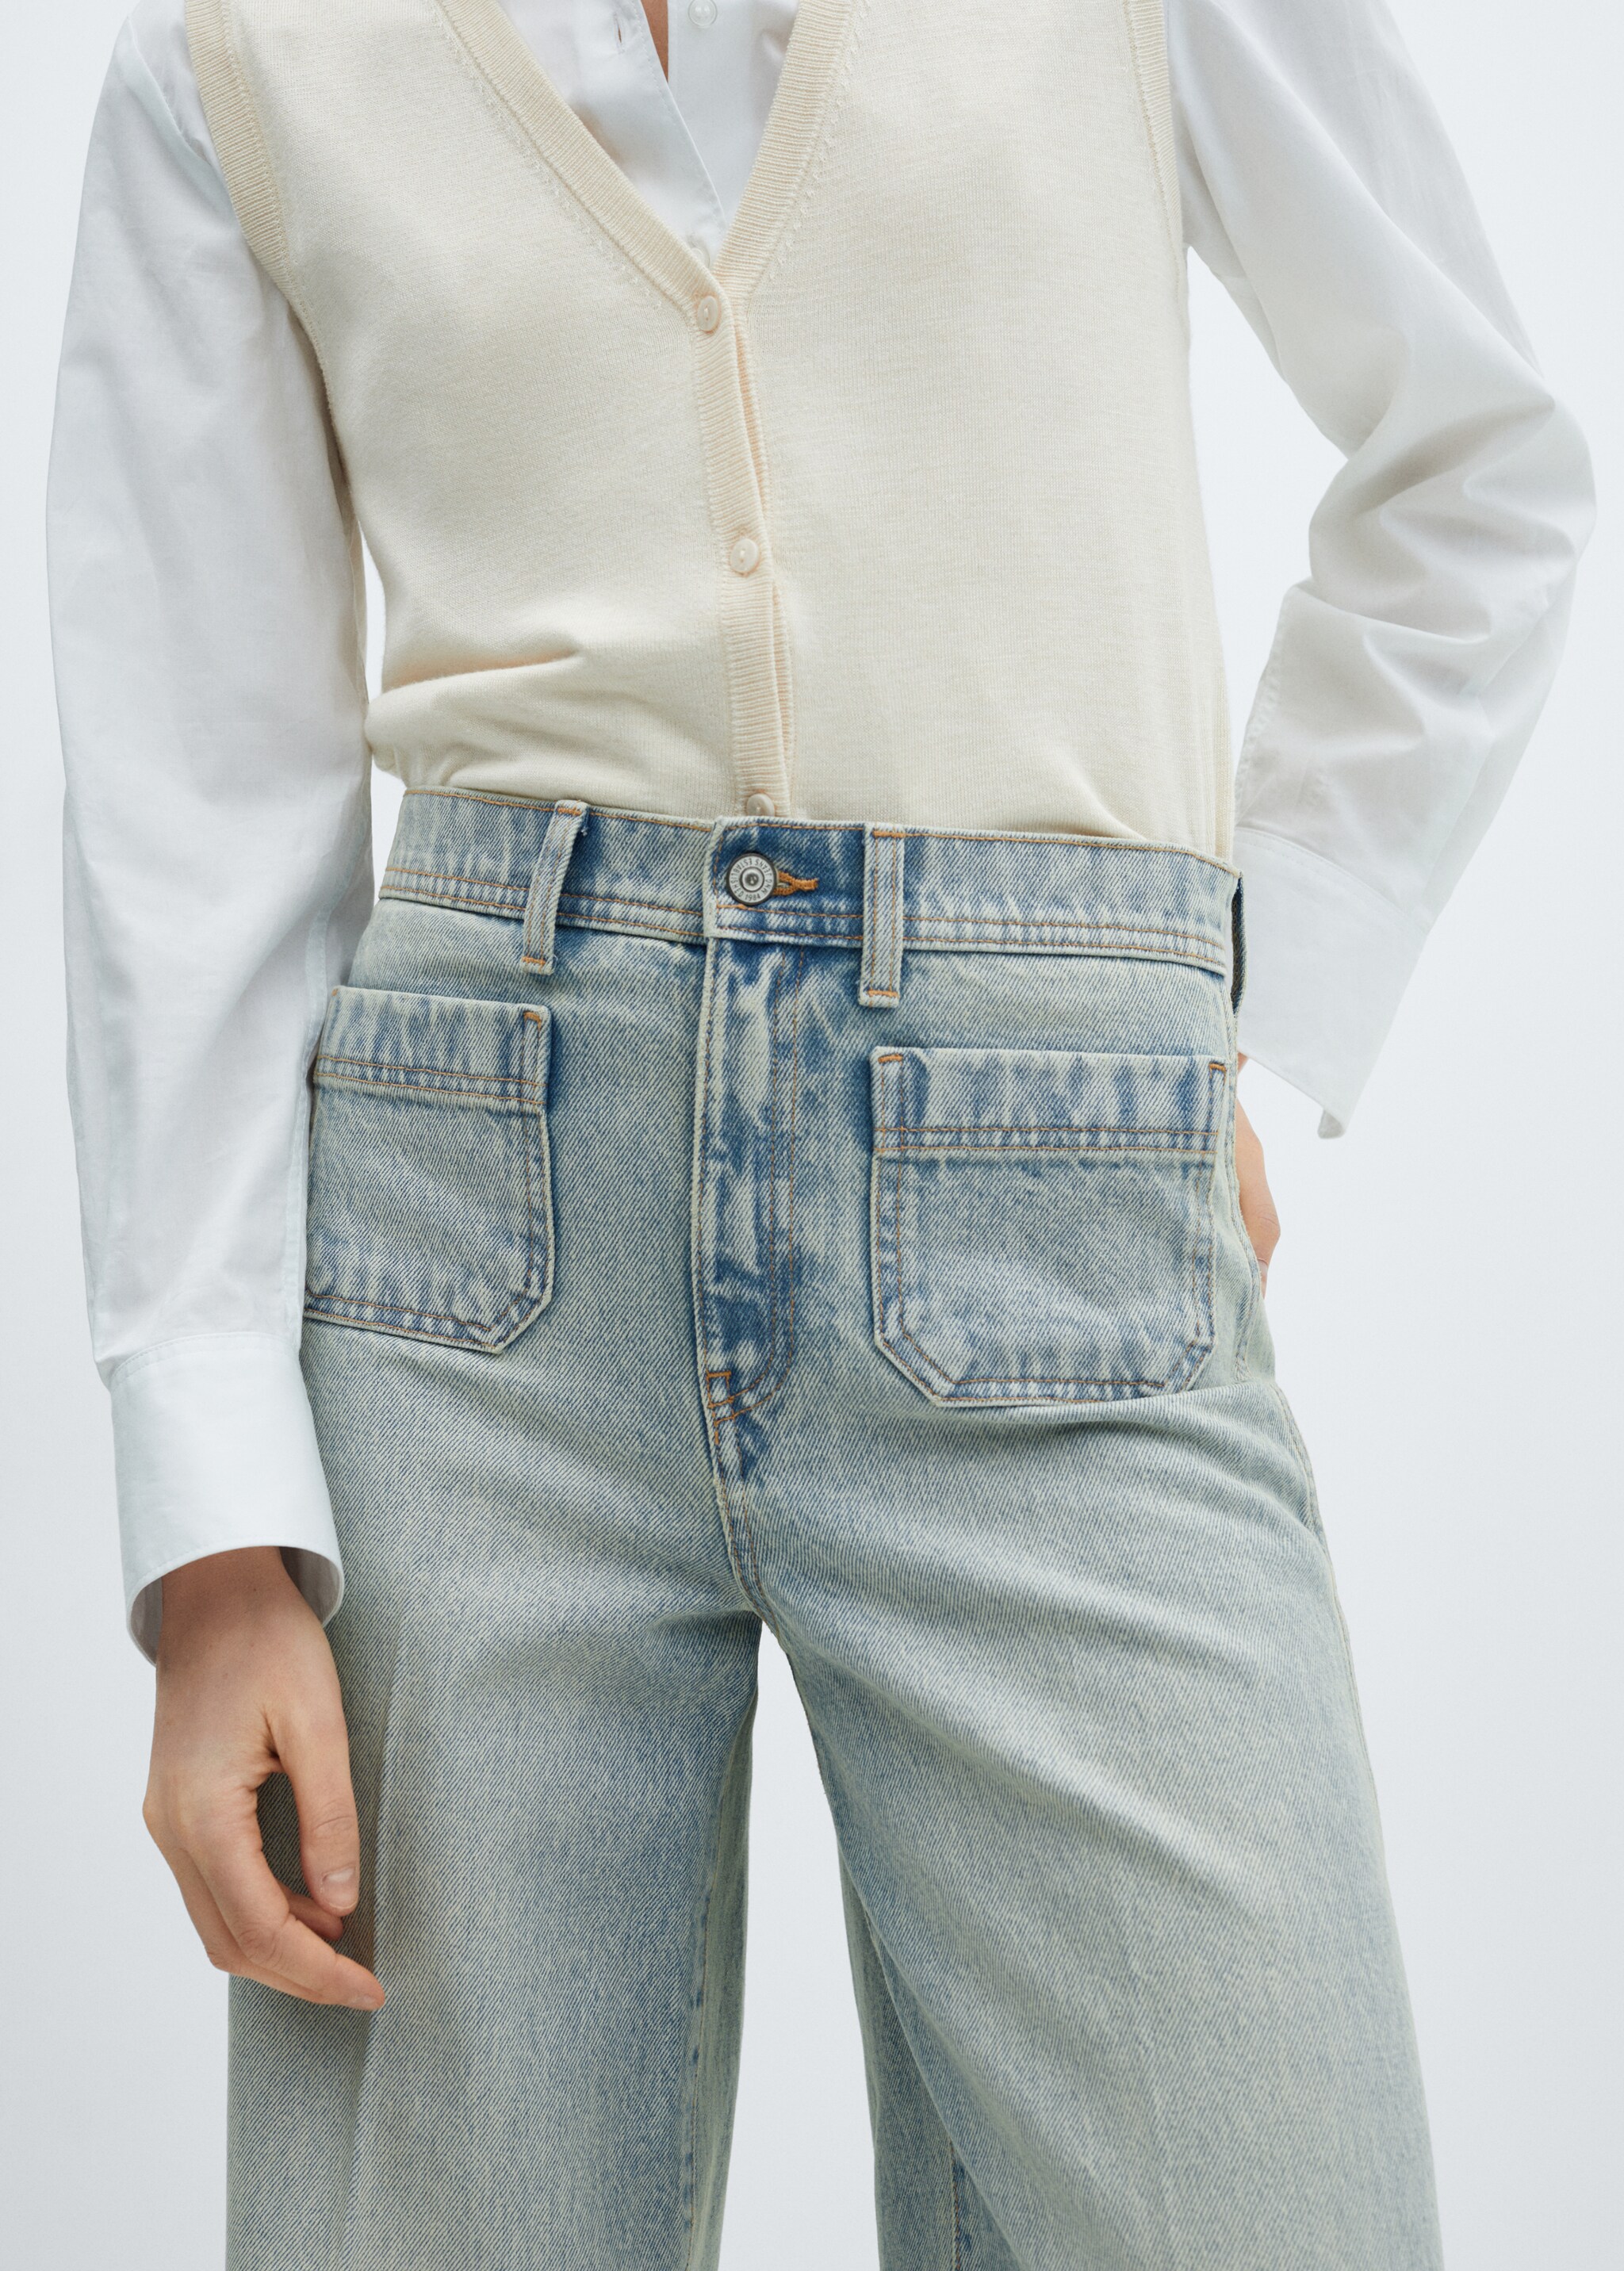 Wideleg jeans with pockets - Details of the article 6